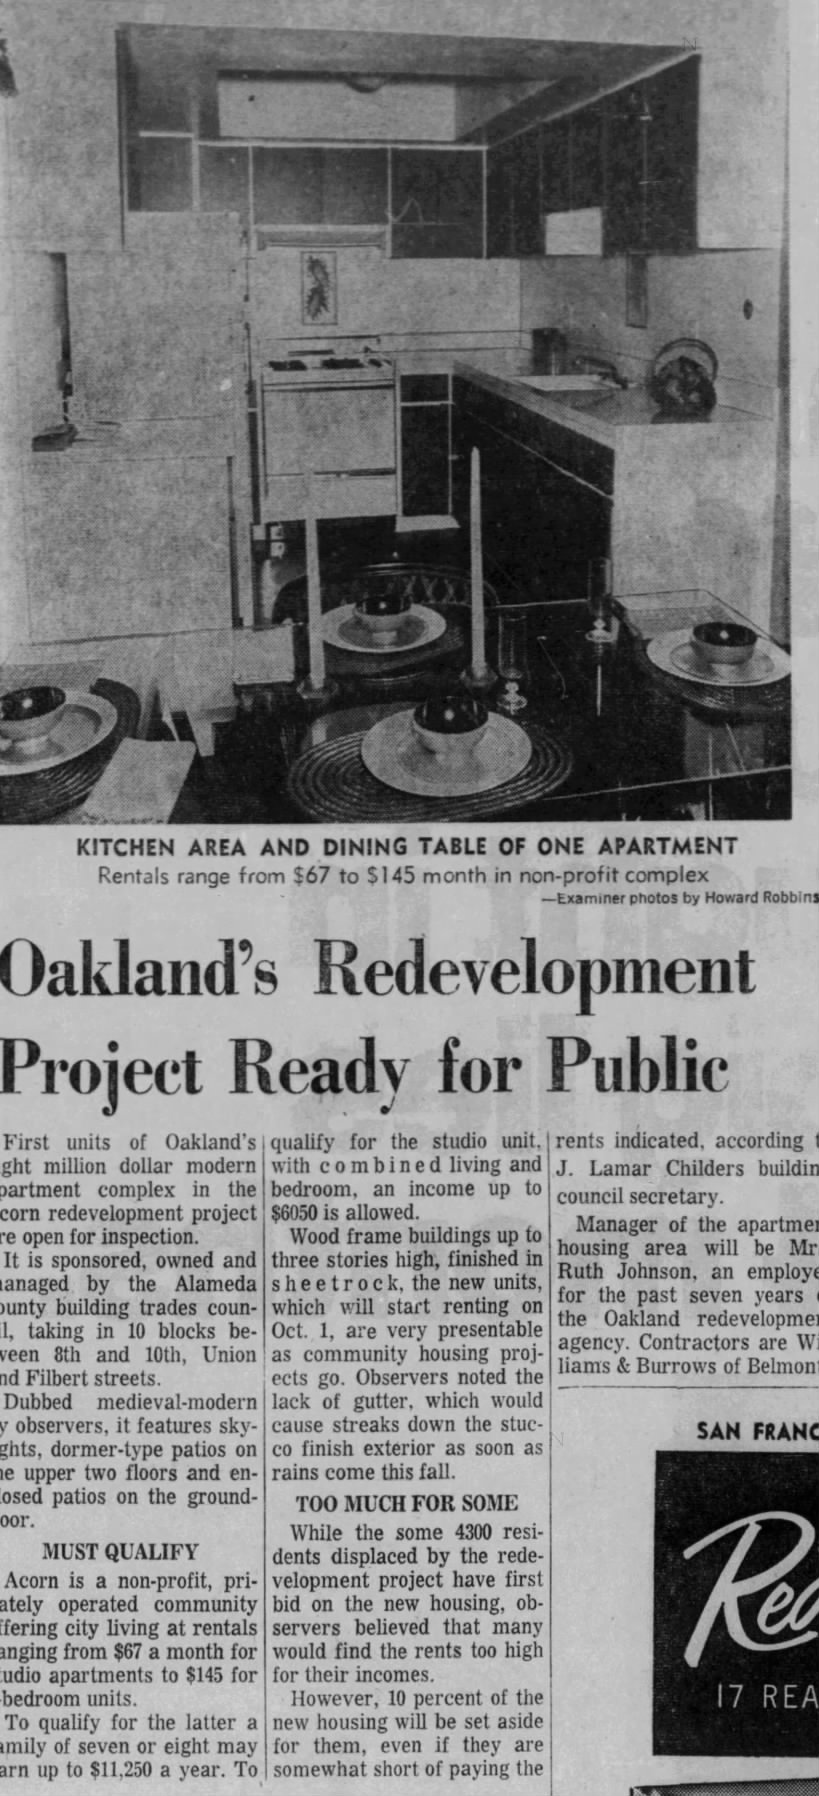 Project Ready for Public - SF Examiner September 16, 1968